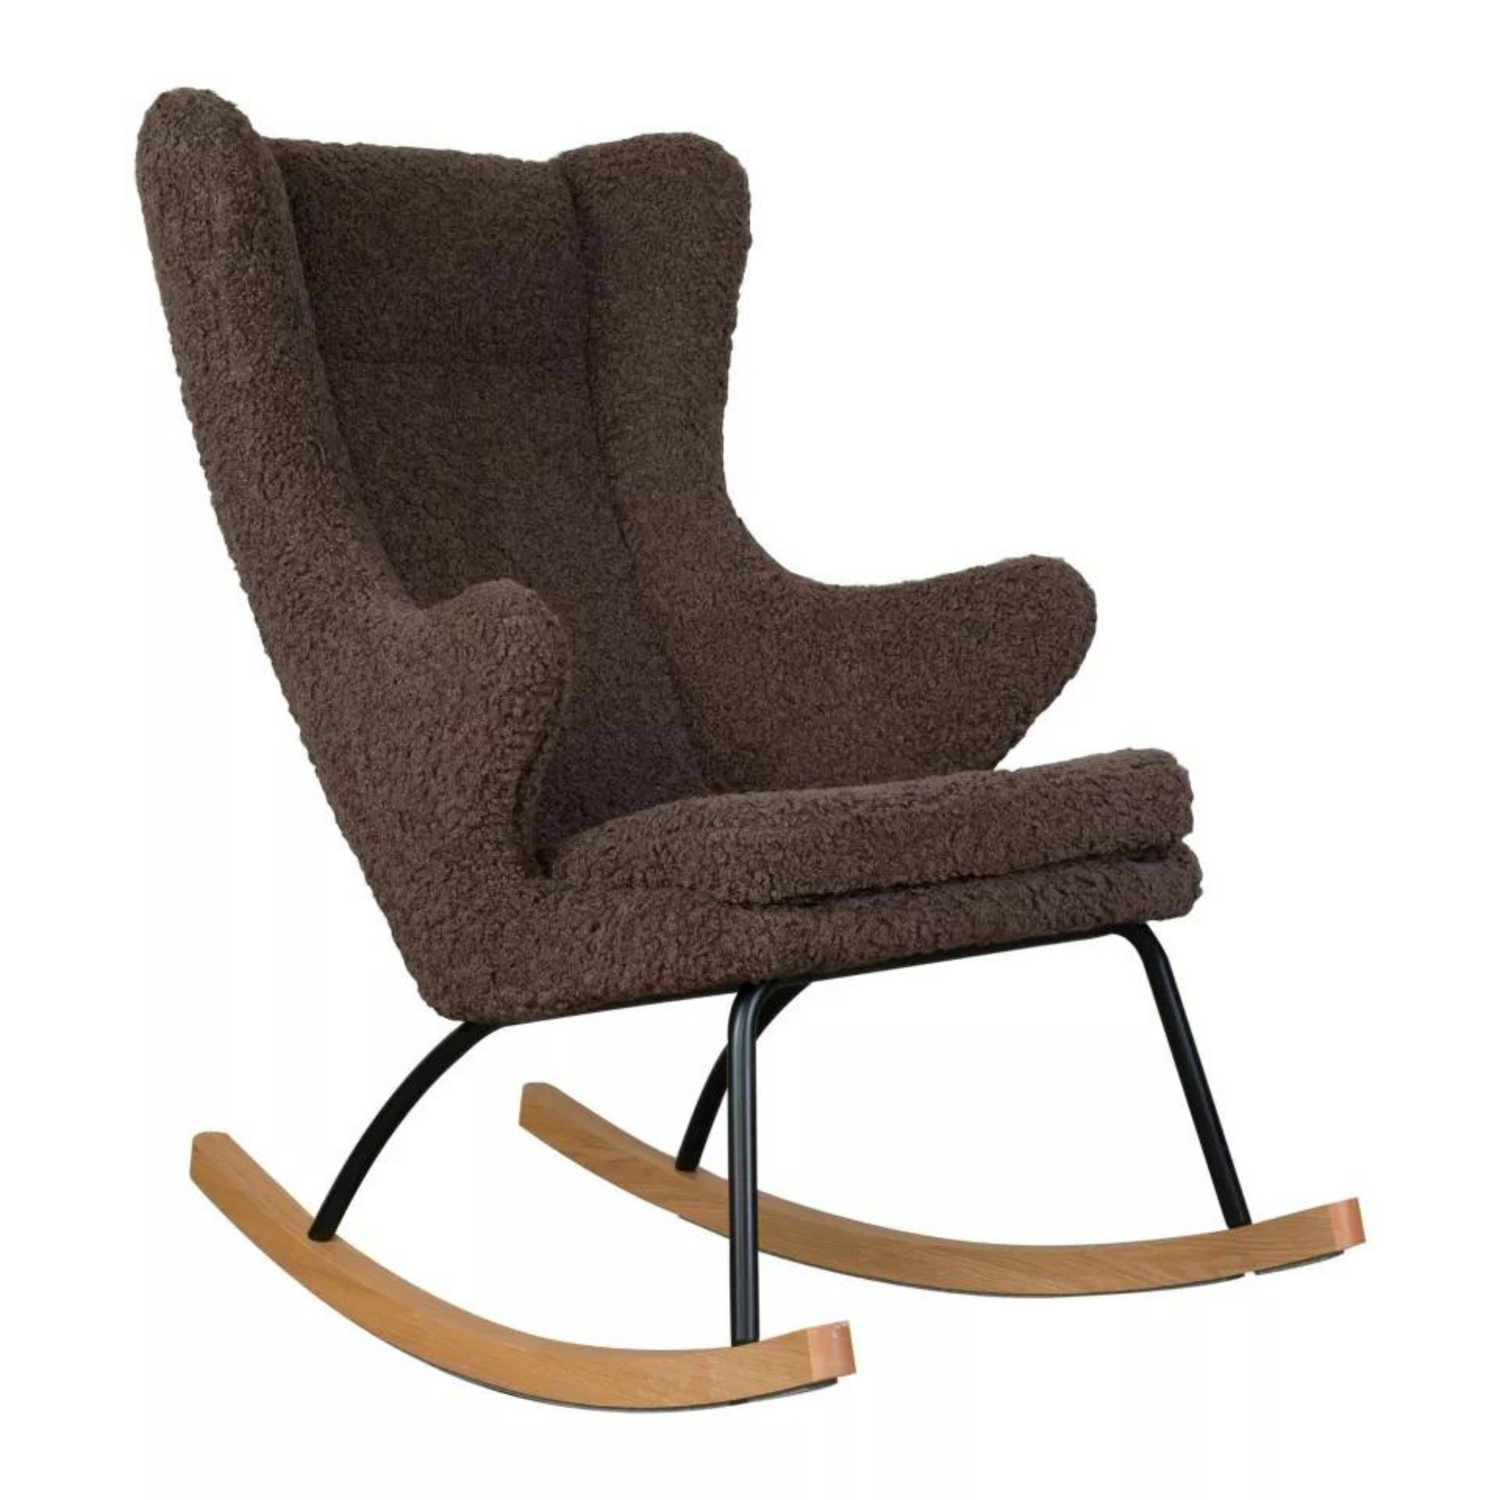 Quax rocking chair Chair De Luxe - Limited Edition